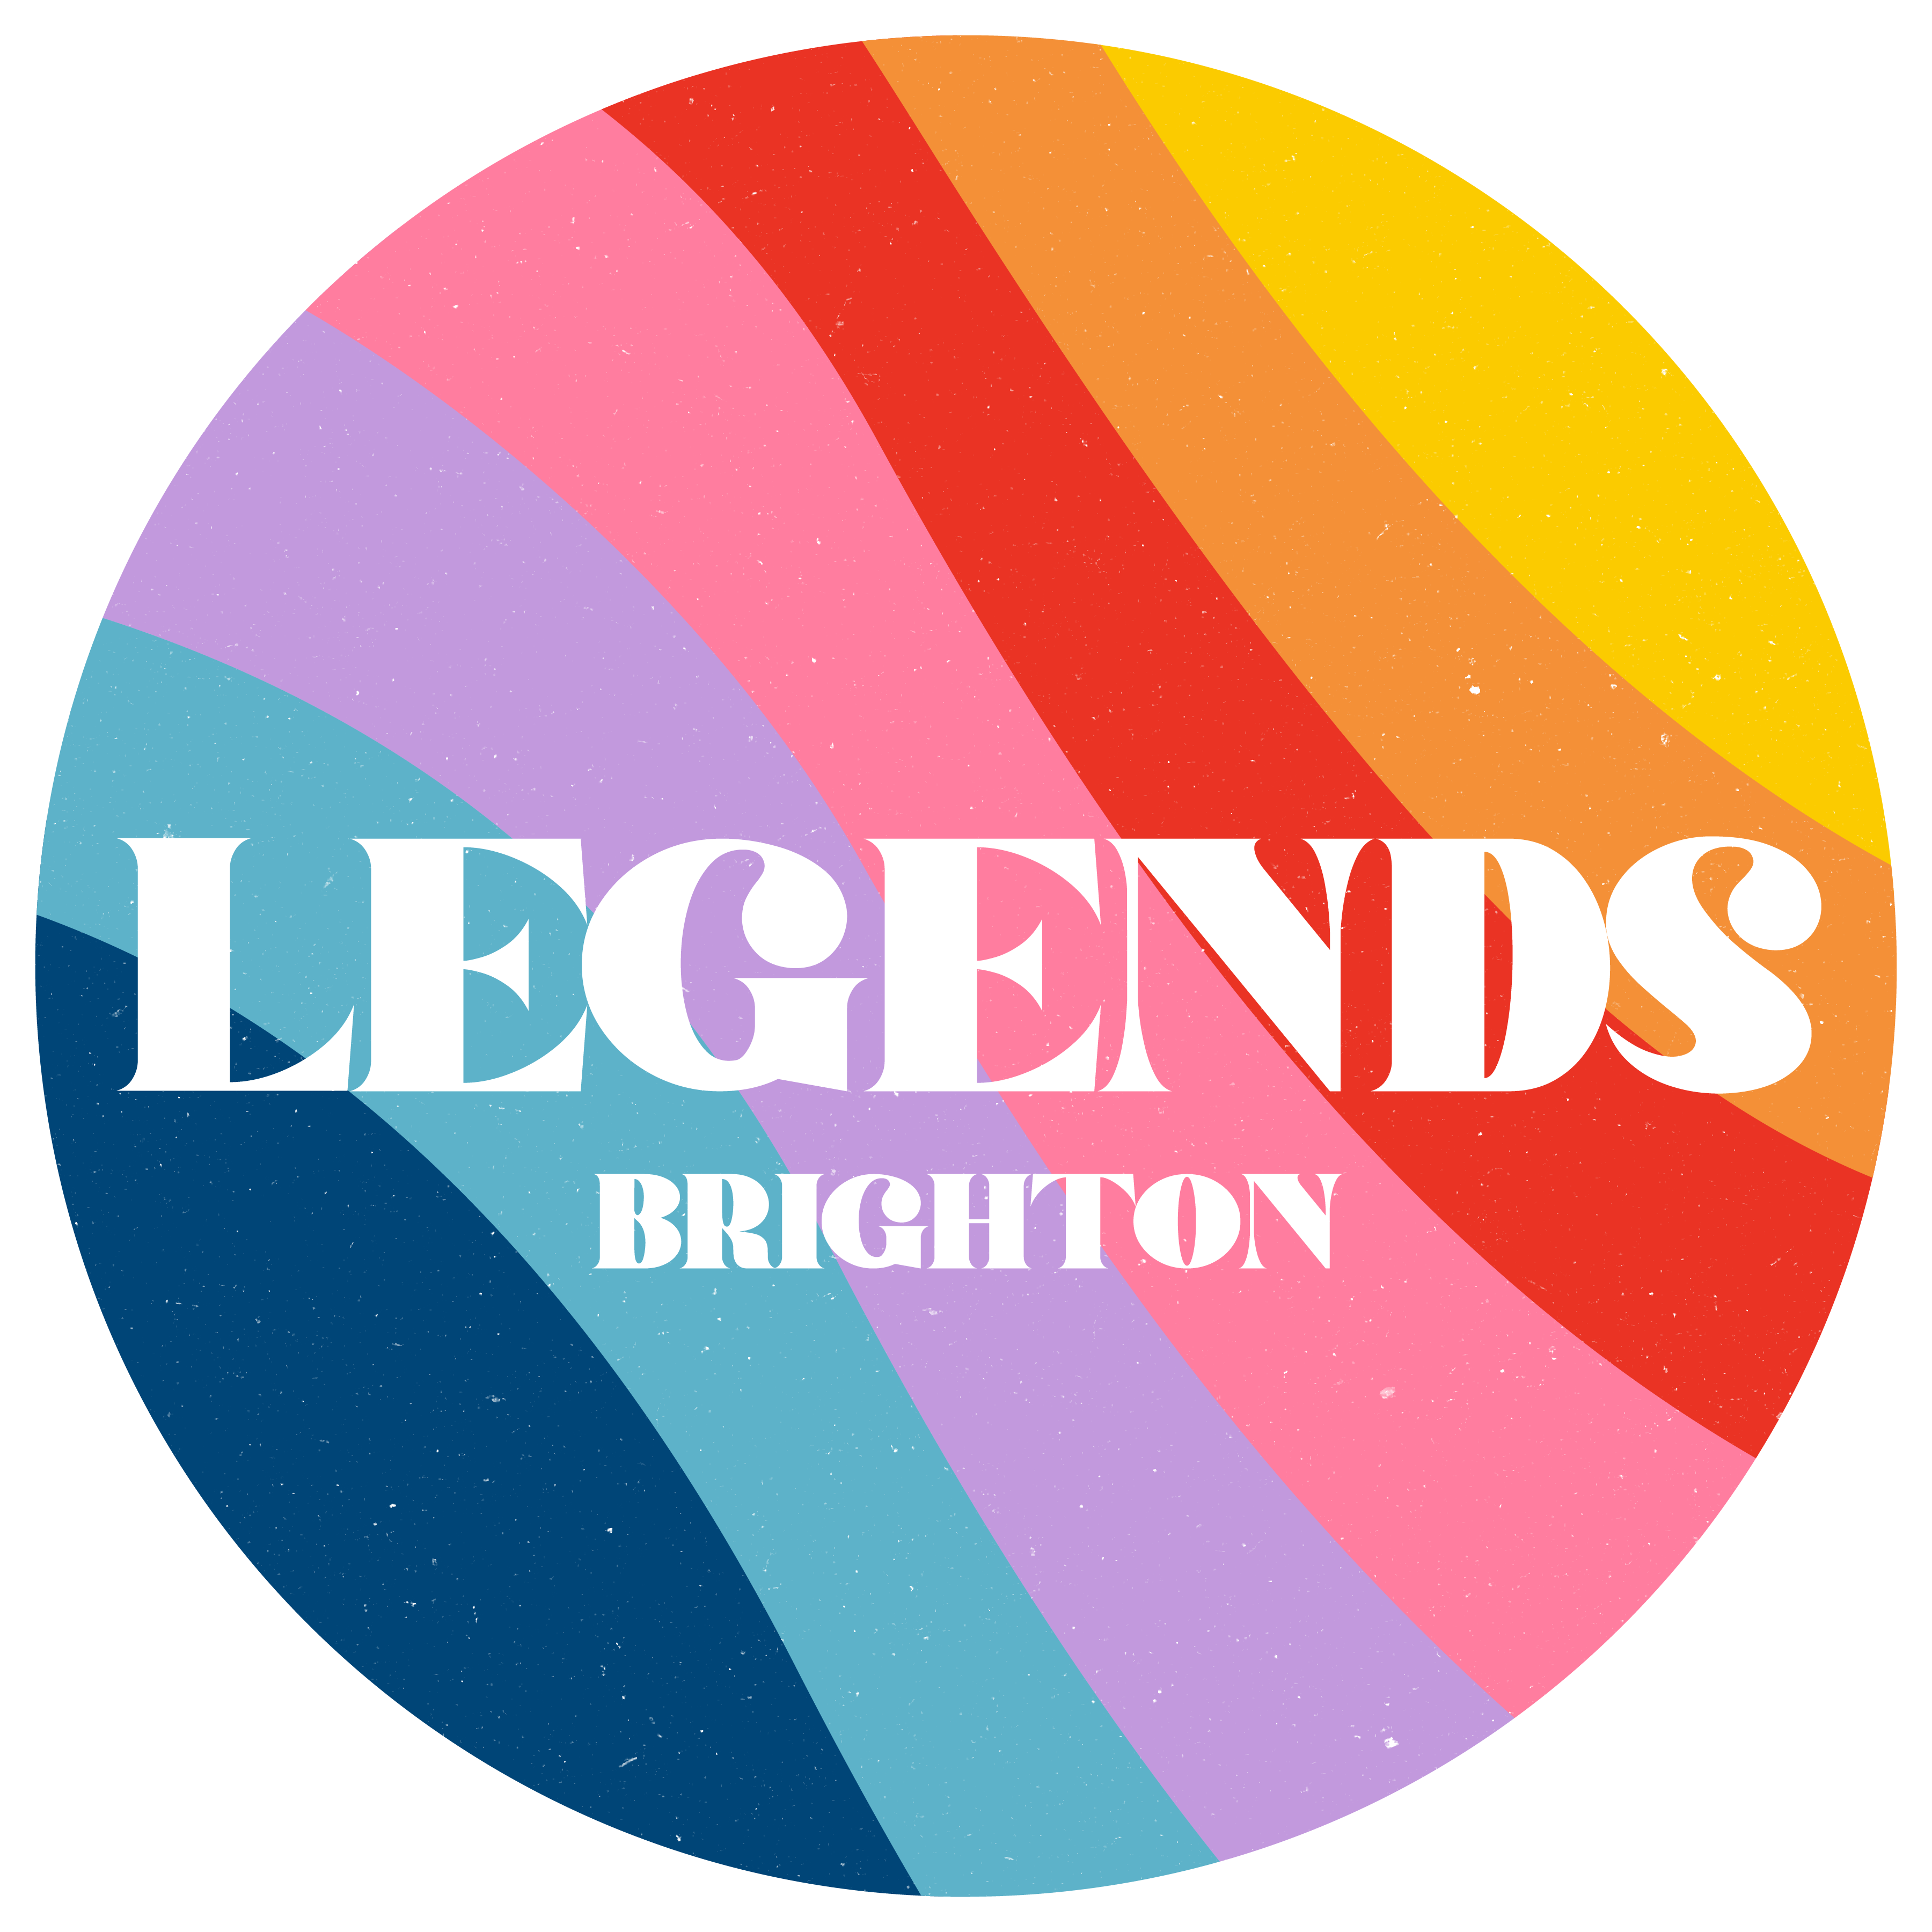 2 Legends Brighton Coupon Codes And Offers 250 OFF, And More